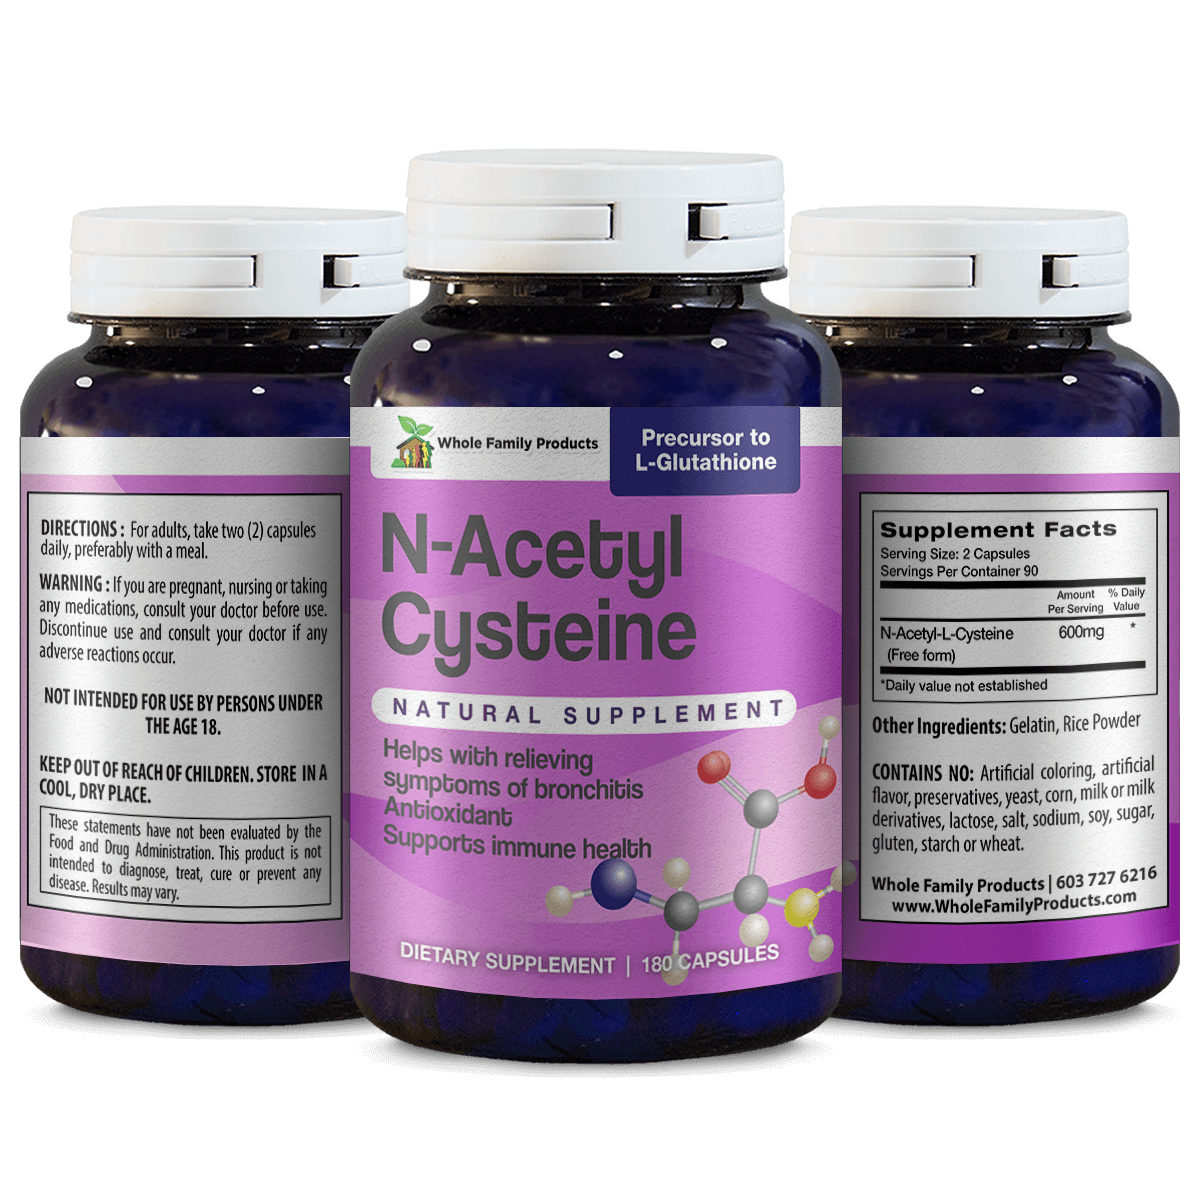 N-Acetyl Cysteine Natural Antioxidant and Supports Immune Health